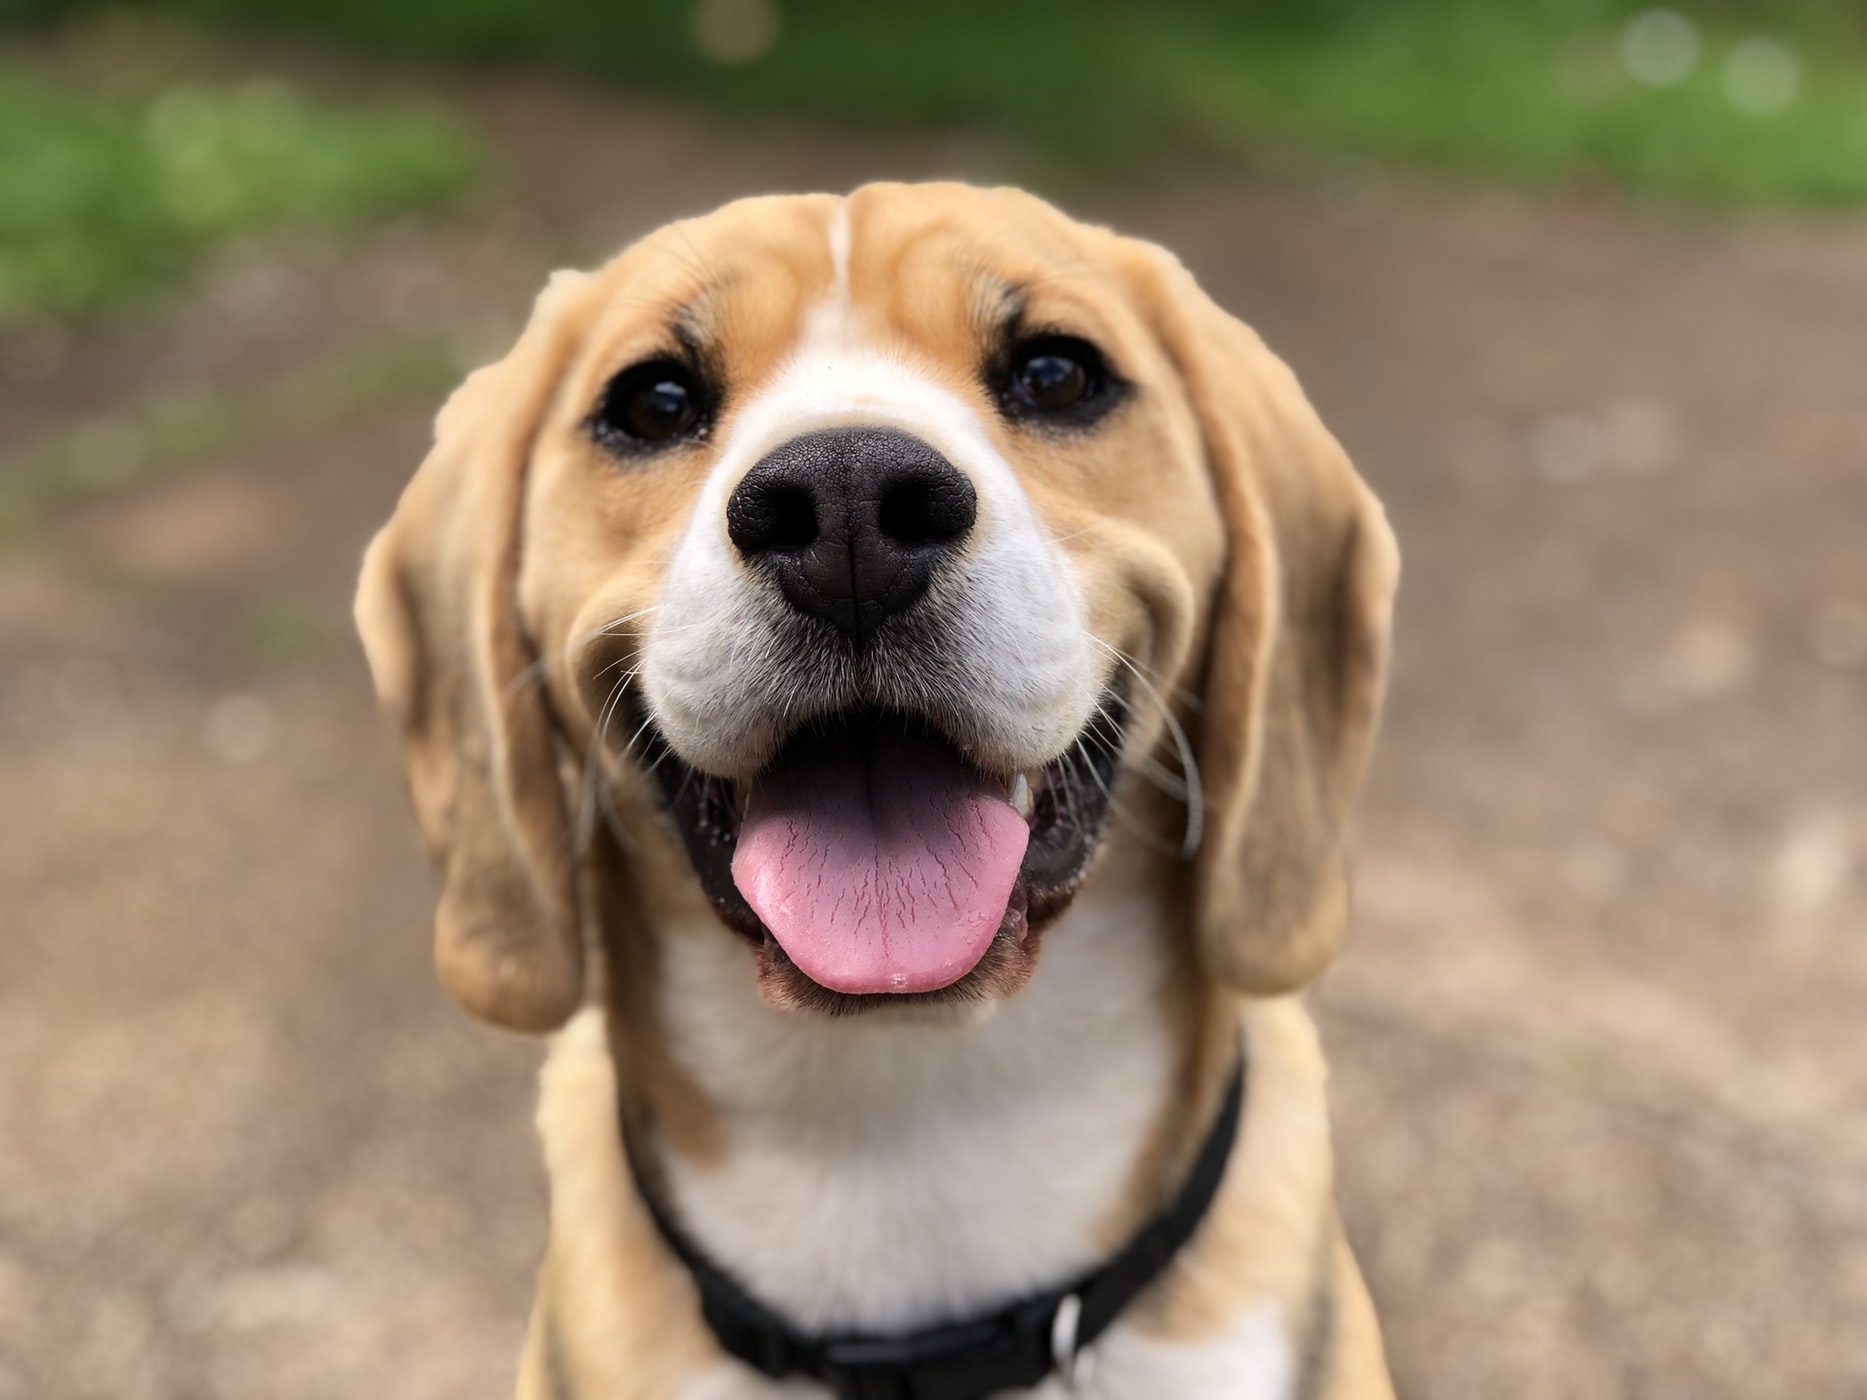 A Beagle sitting on the pavement while smiling